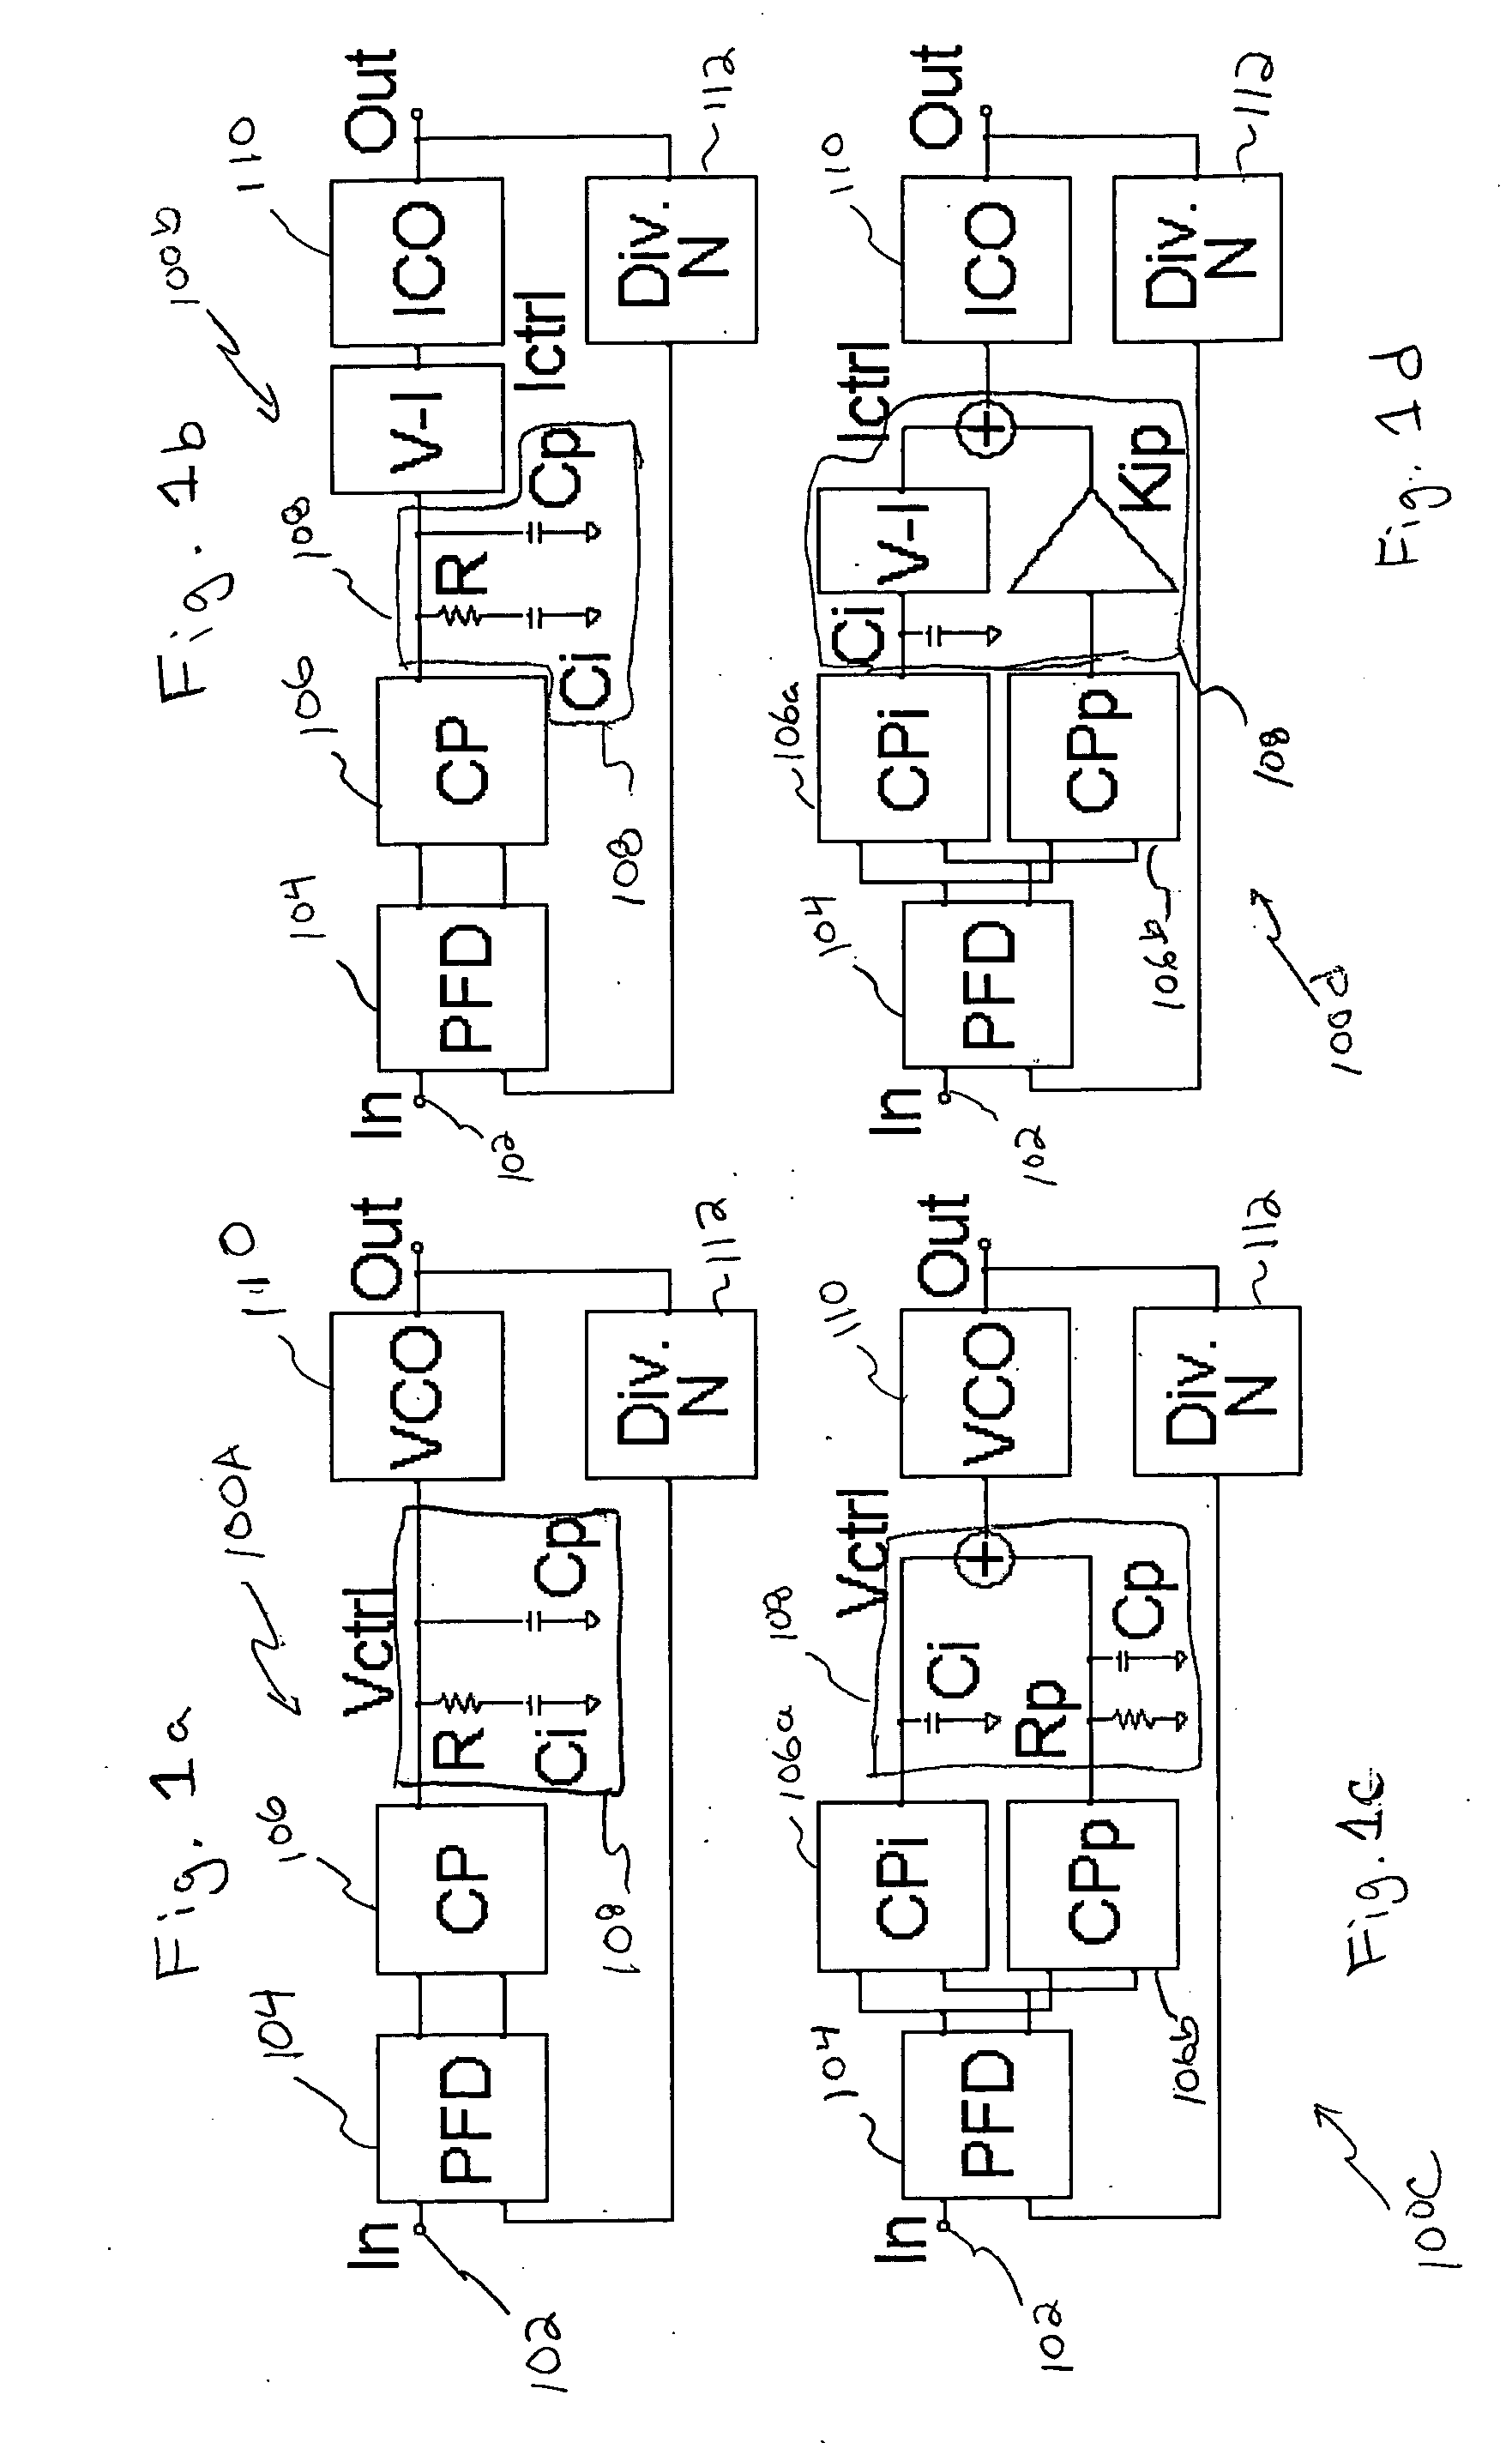 Method and apparatus to achieve a process, temperature and divider modulus independent PLL loop bandwidth and damping factor using open-loop calibration techniques